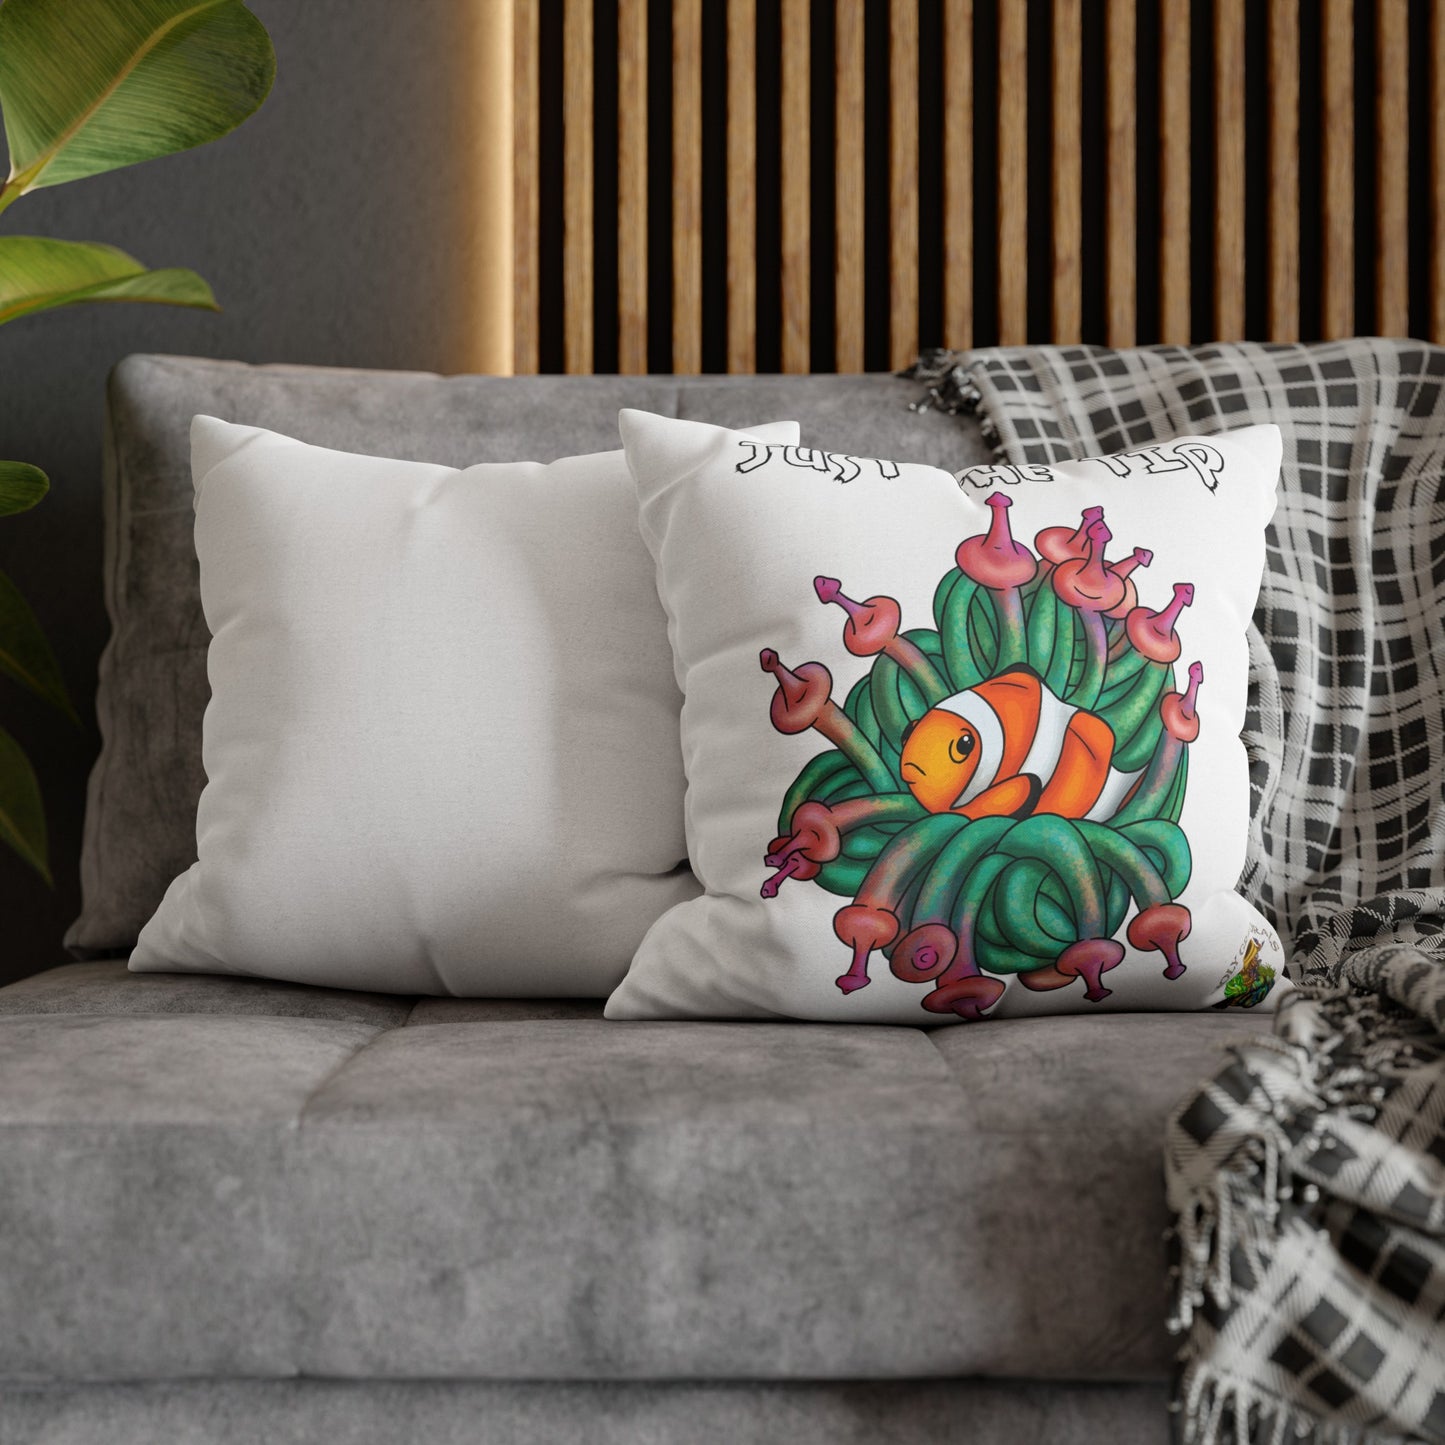 "Just The Tip" Bubble Tip Anemone Square Pillow Cover